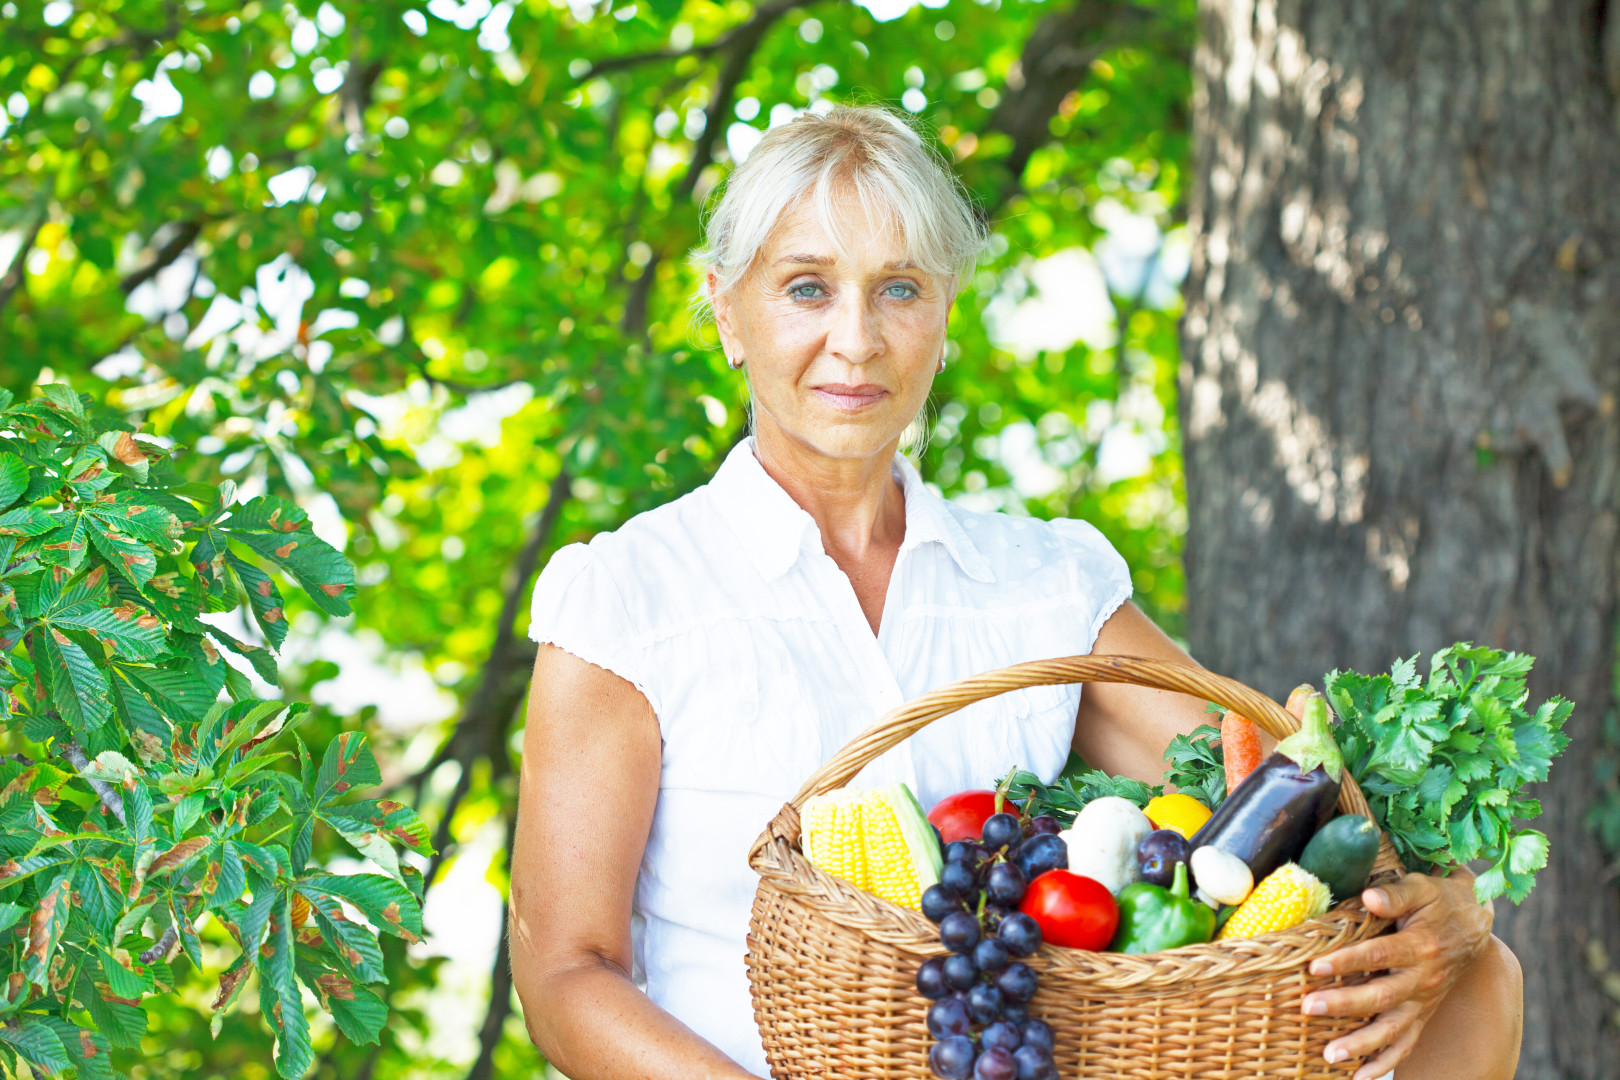 Tips to Incorporate More Fruits and Veggies for a Healthier Seniors Diet